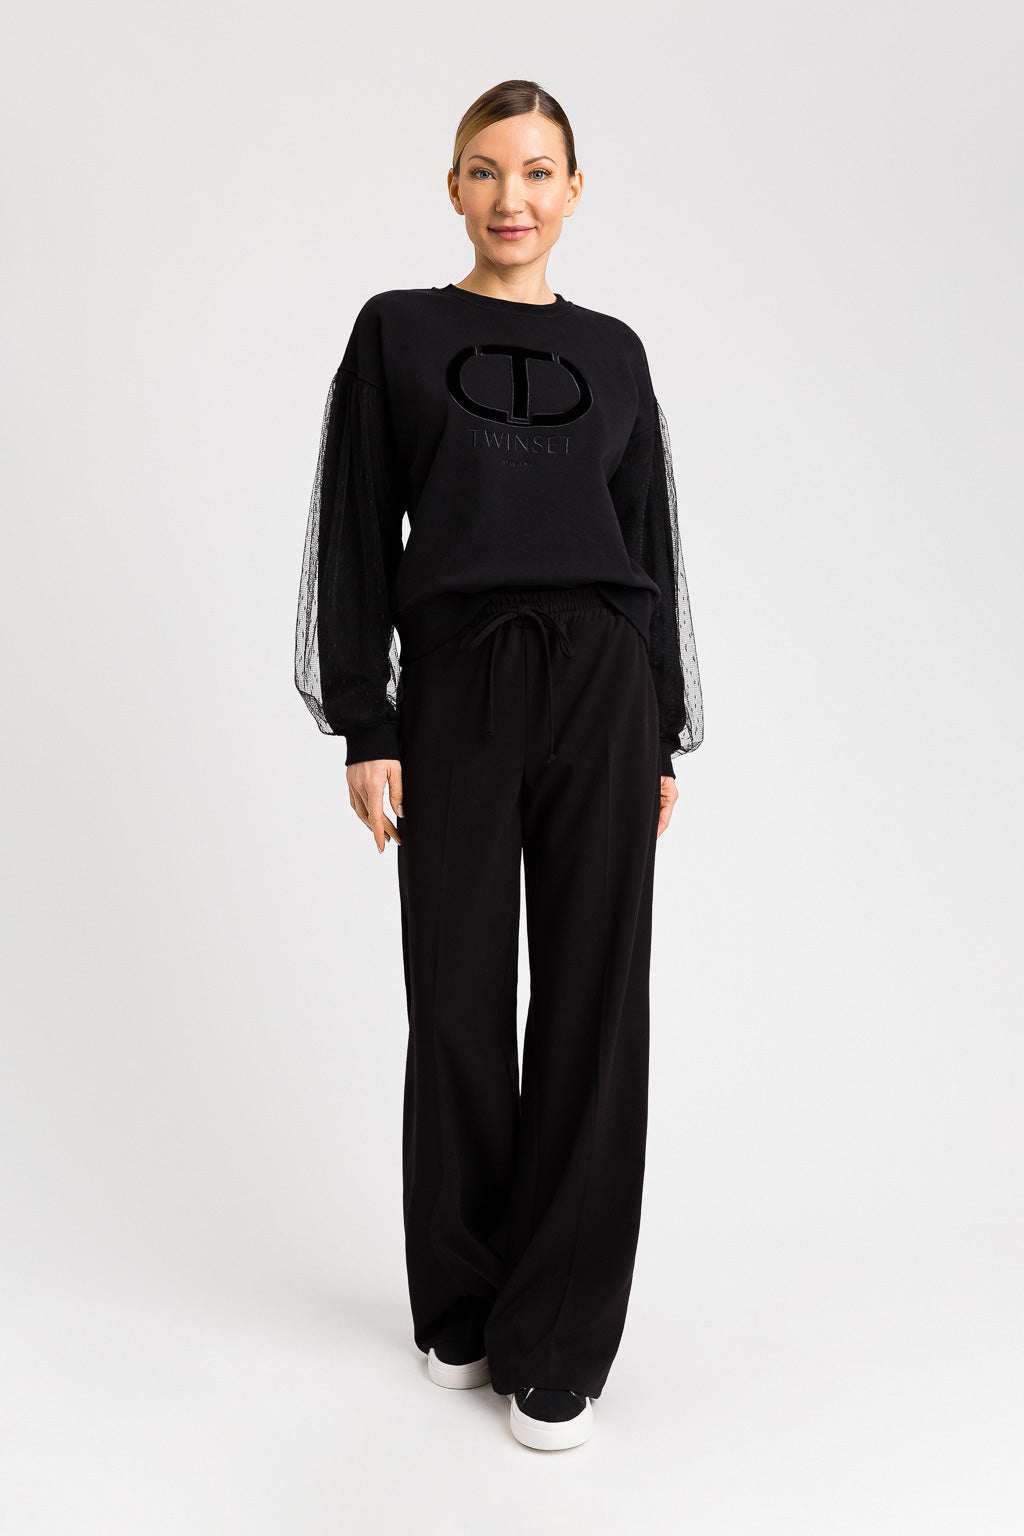 Twinset Soft Black Trousers